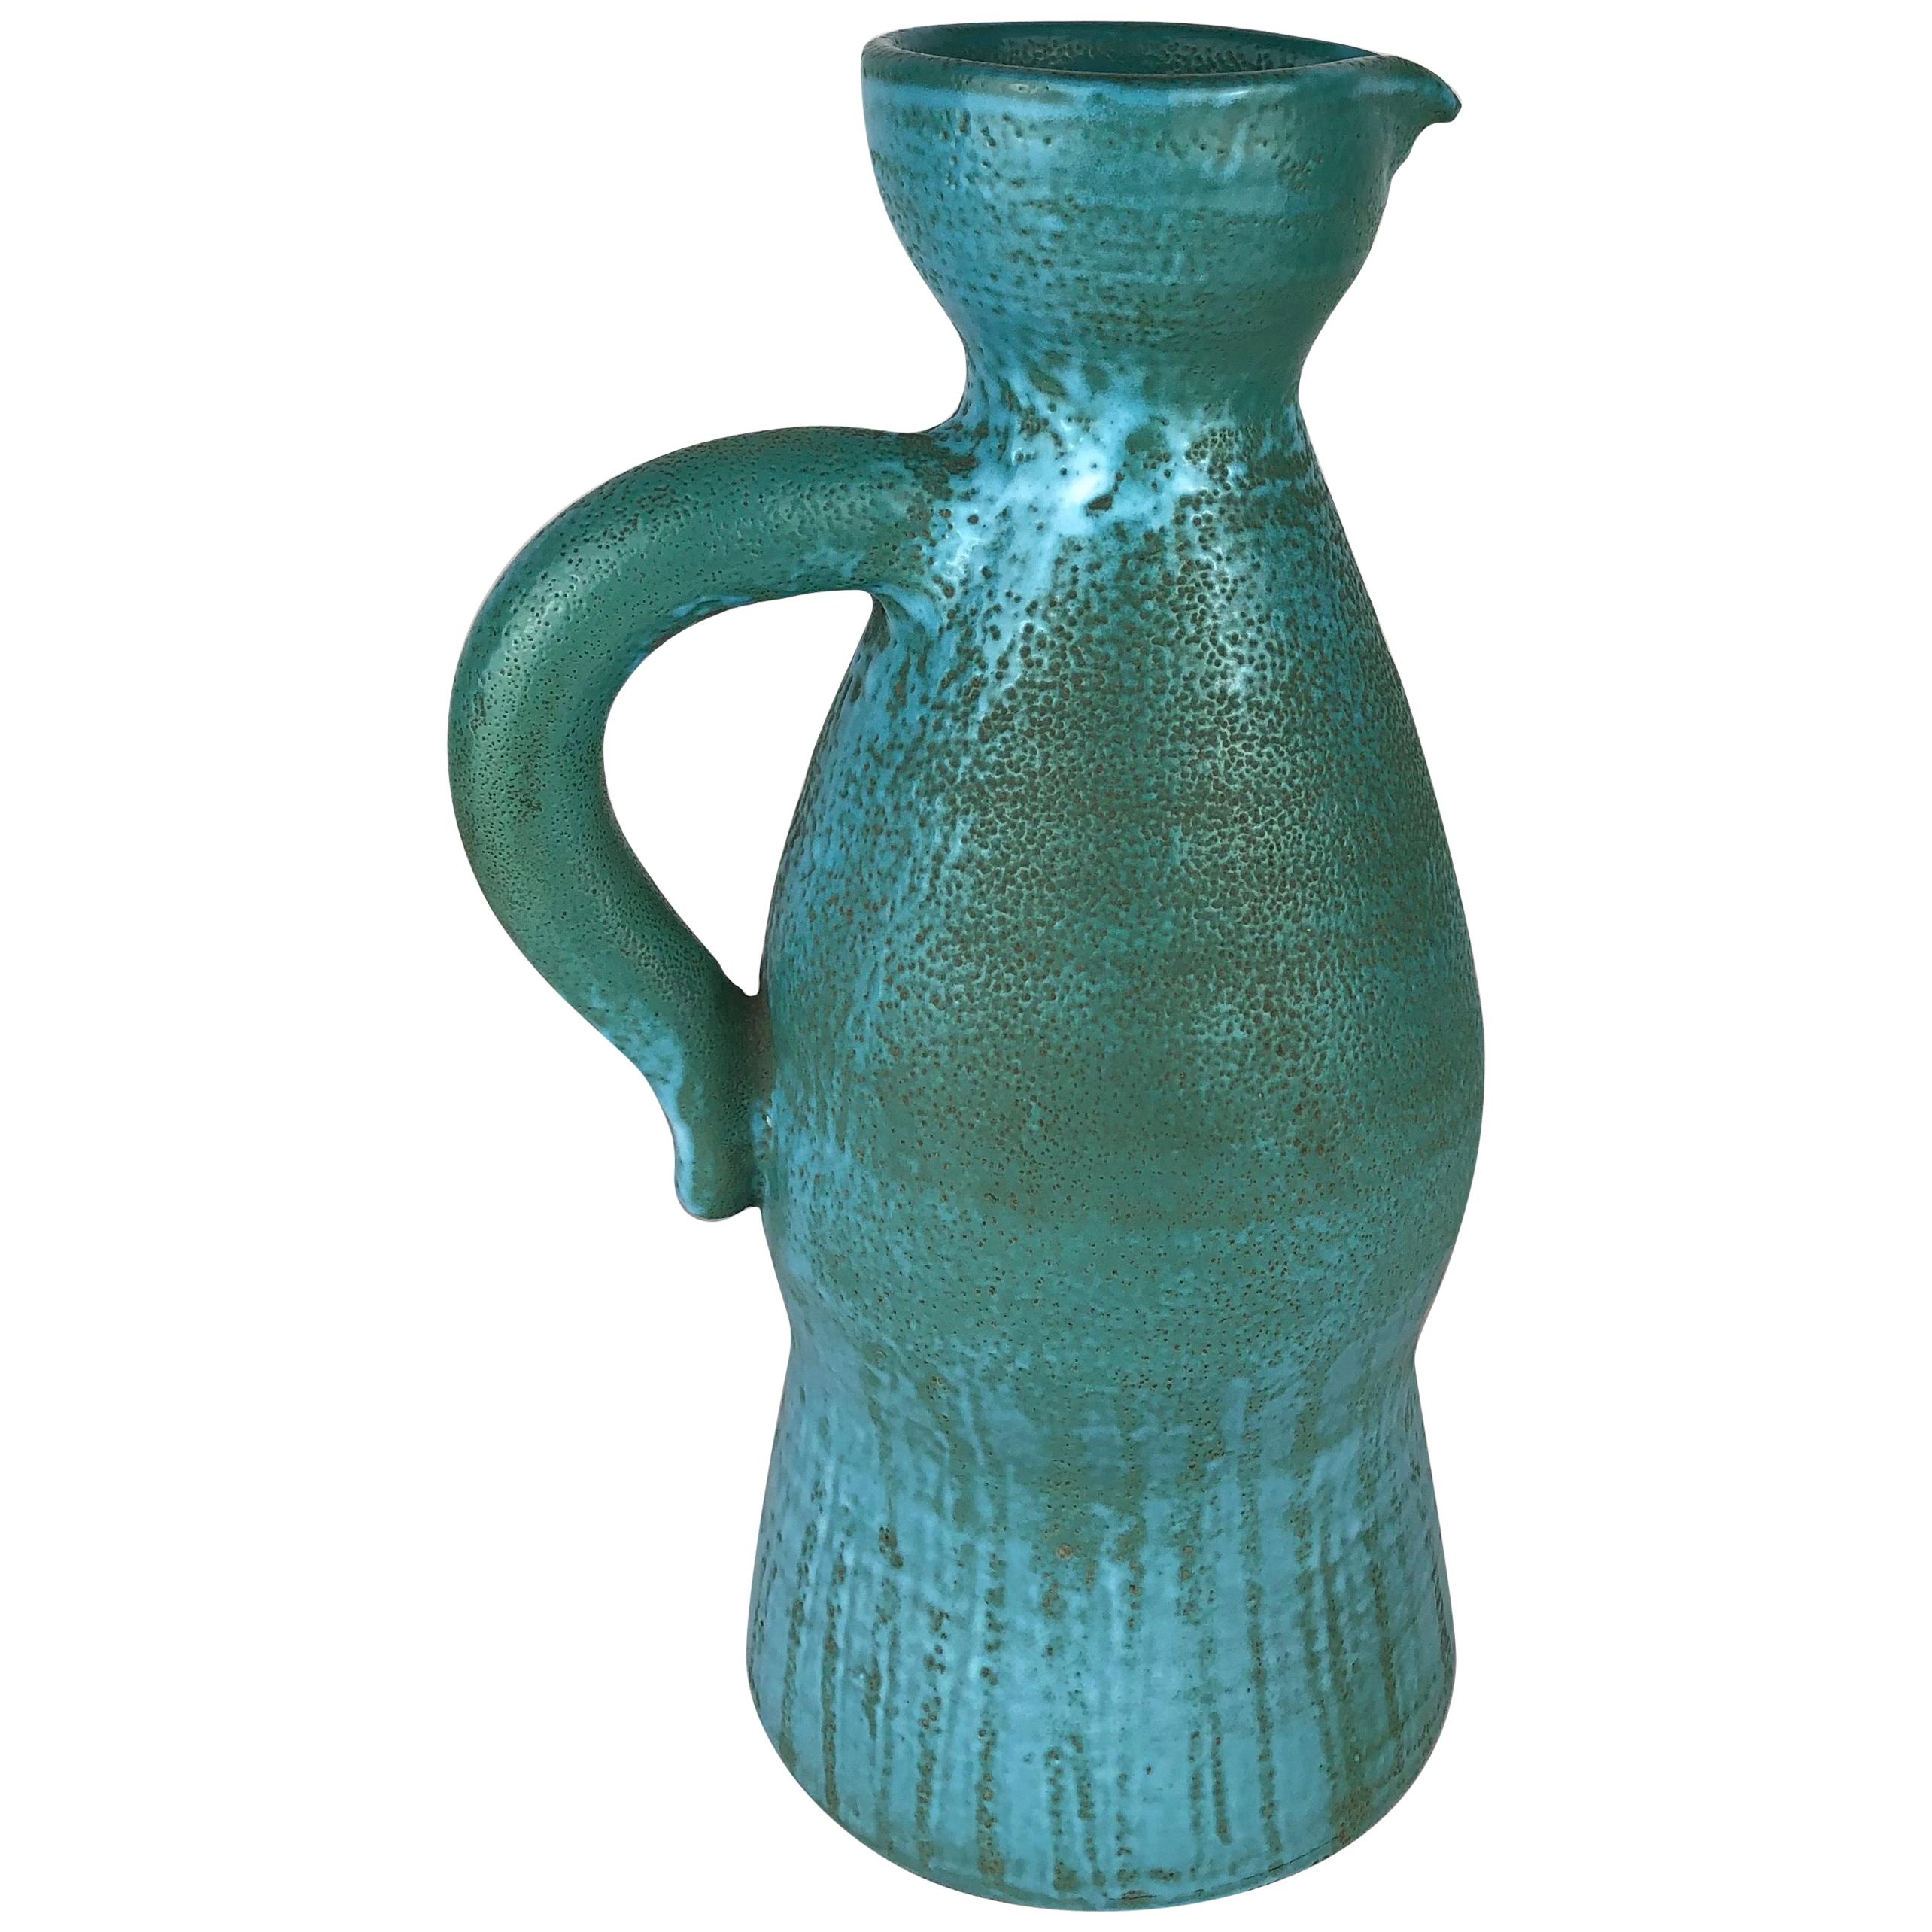 Stunning Accolay French Ceramic Pitcher, Manner of A. Kostanda